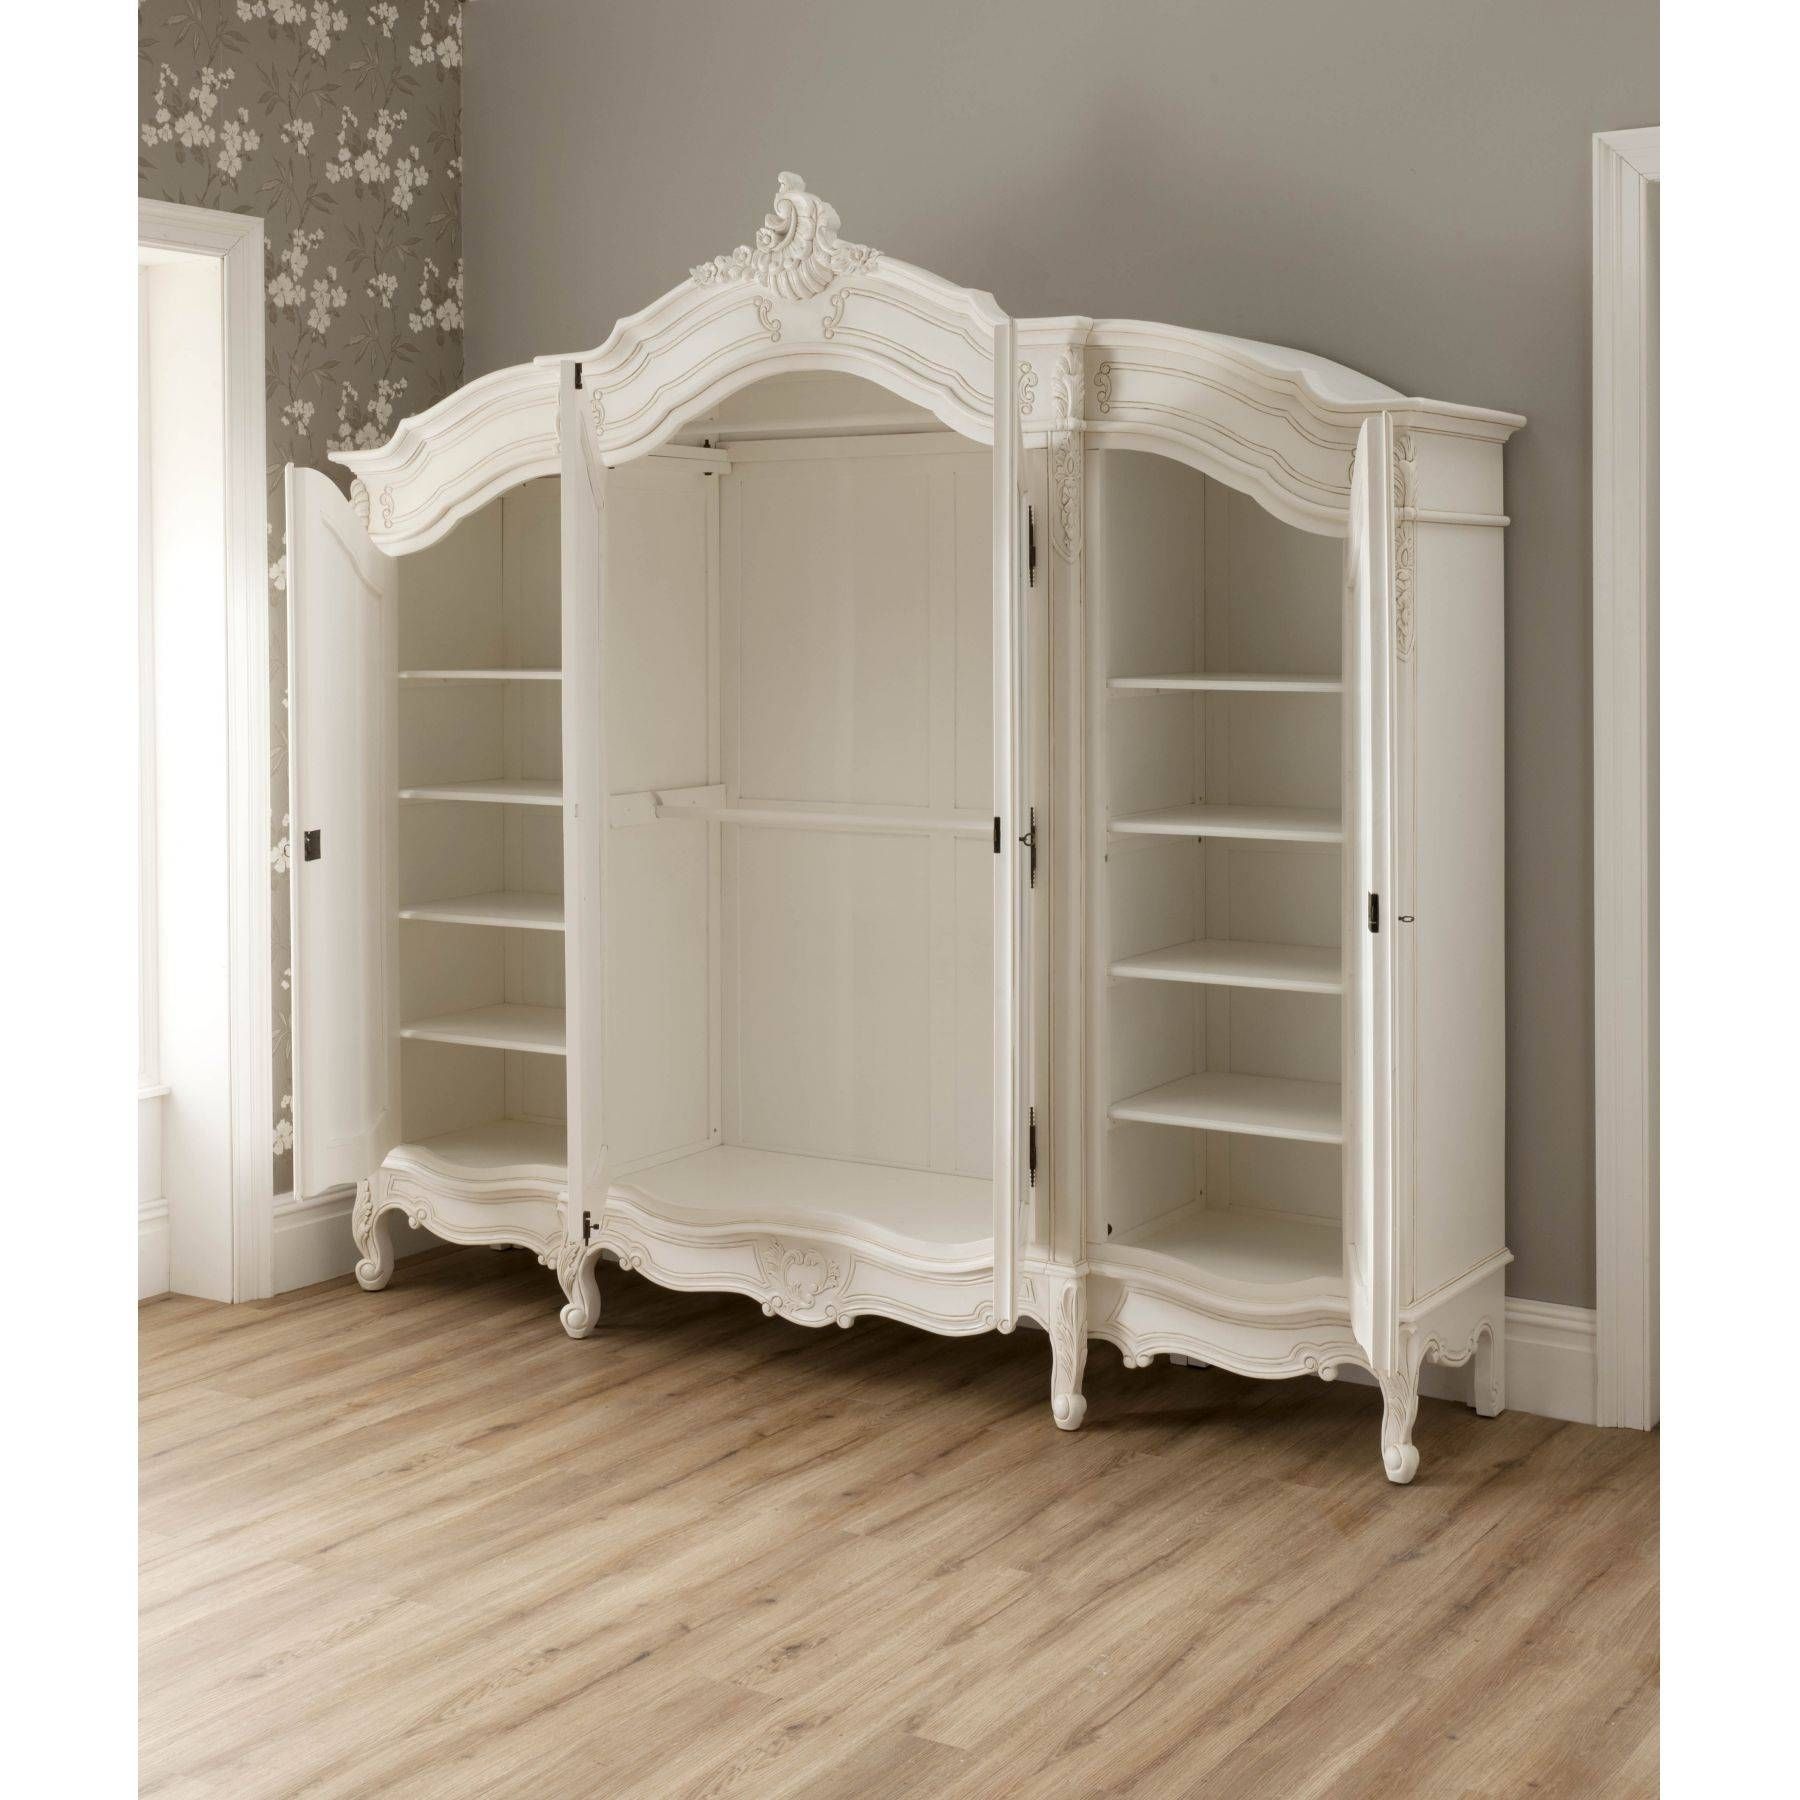 La Rochelle Antique French Wardrobe Working Well Alongside Our With Regard To French Style White Wardrobes (View 4 of 15)